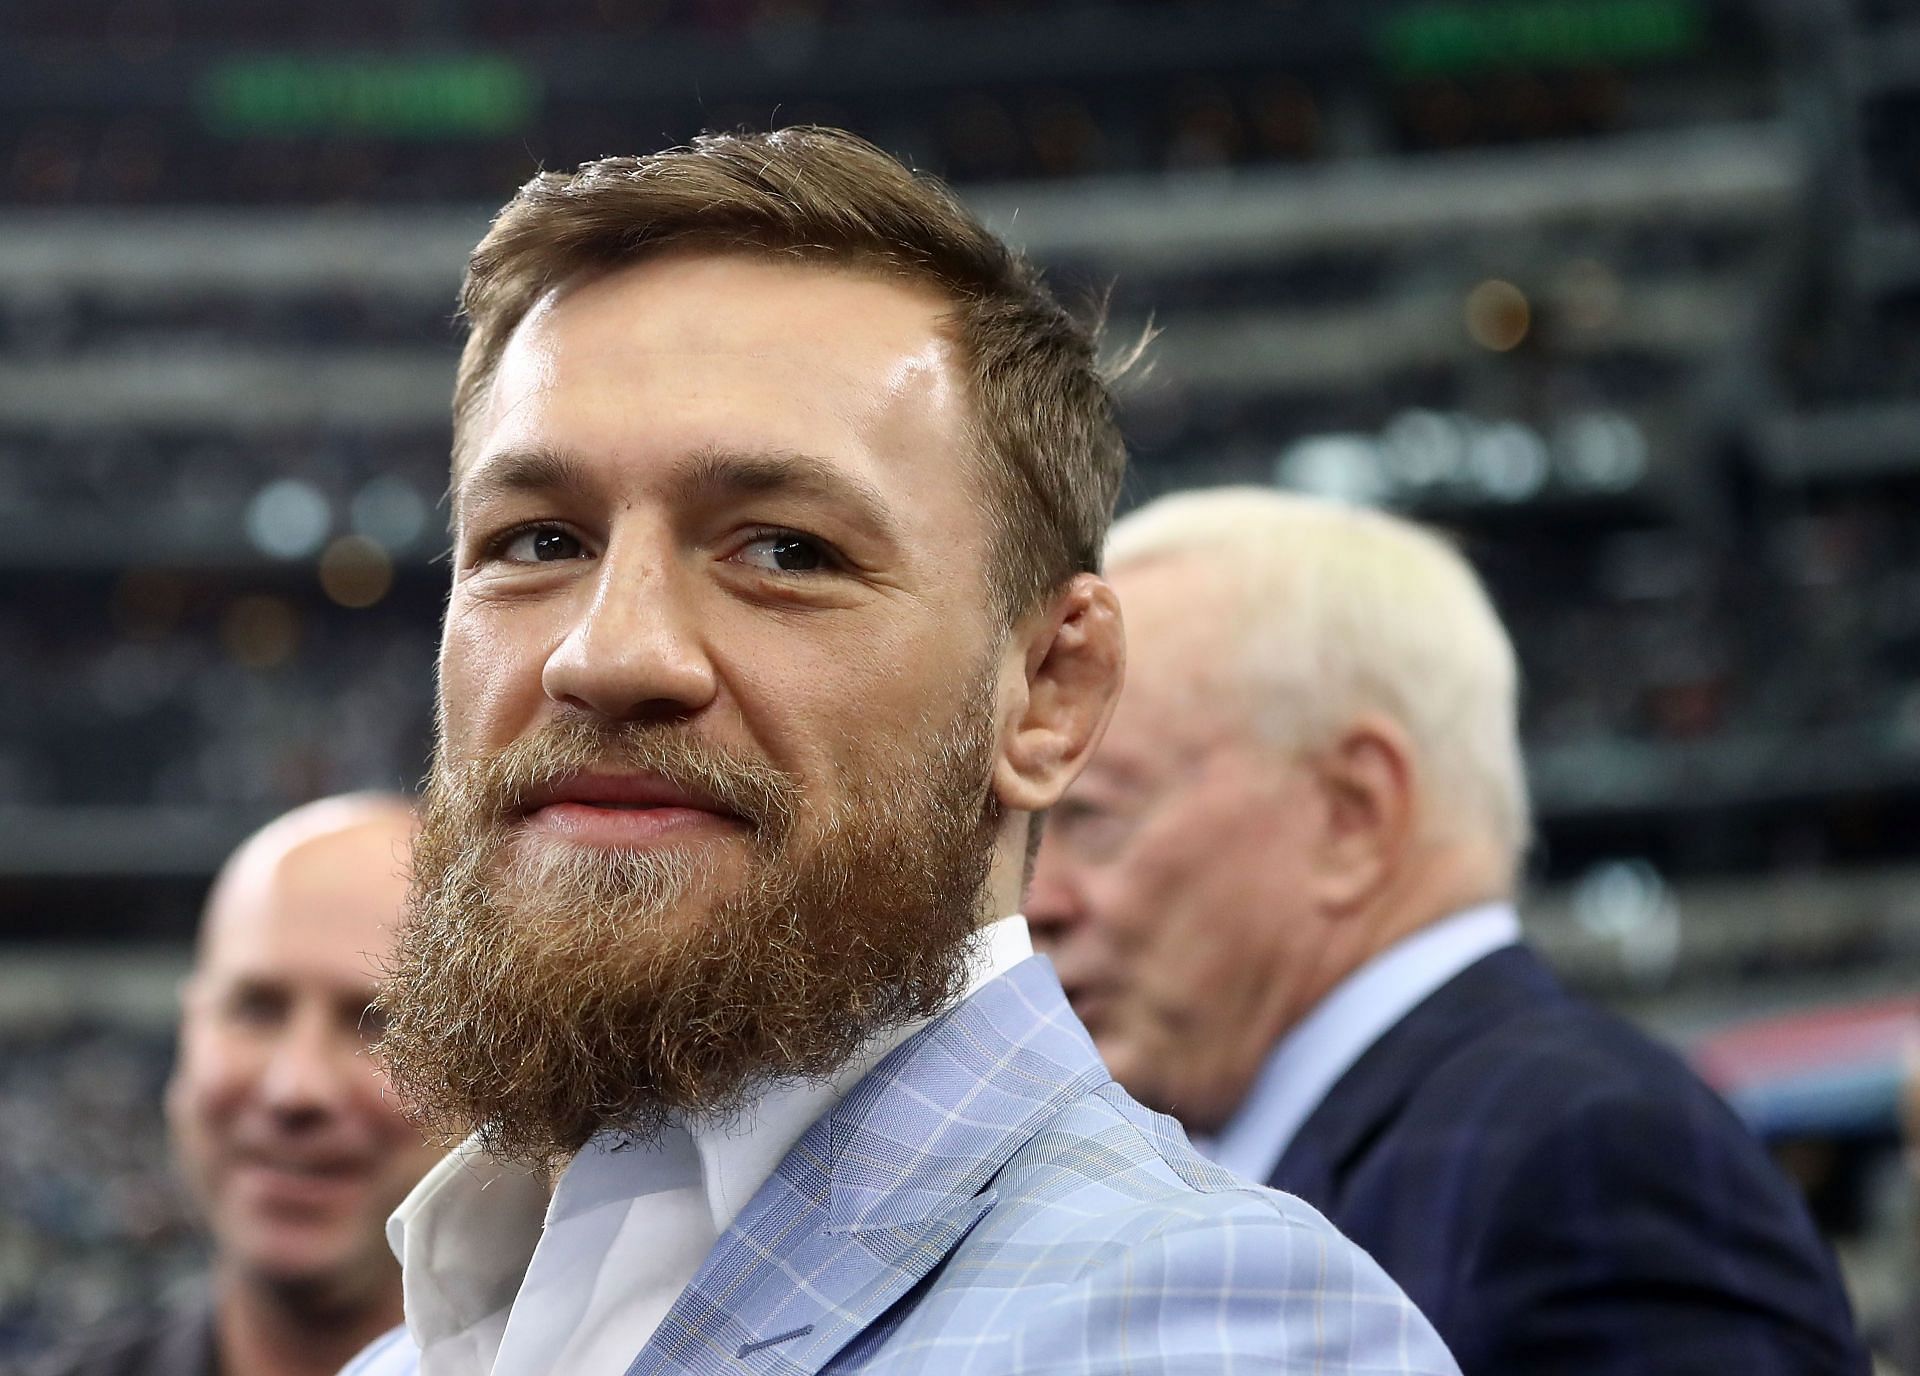 The flamboyant McGregor seems primed to take over Hollywood